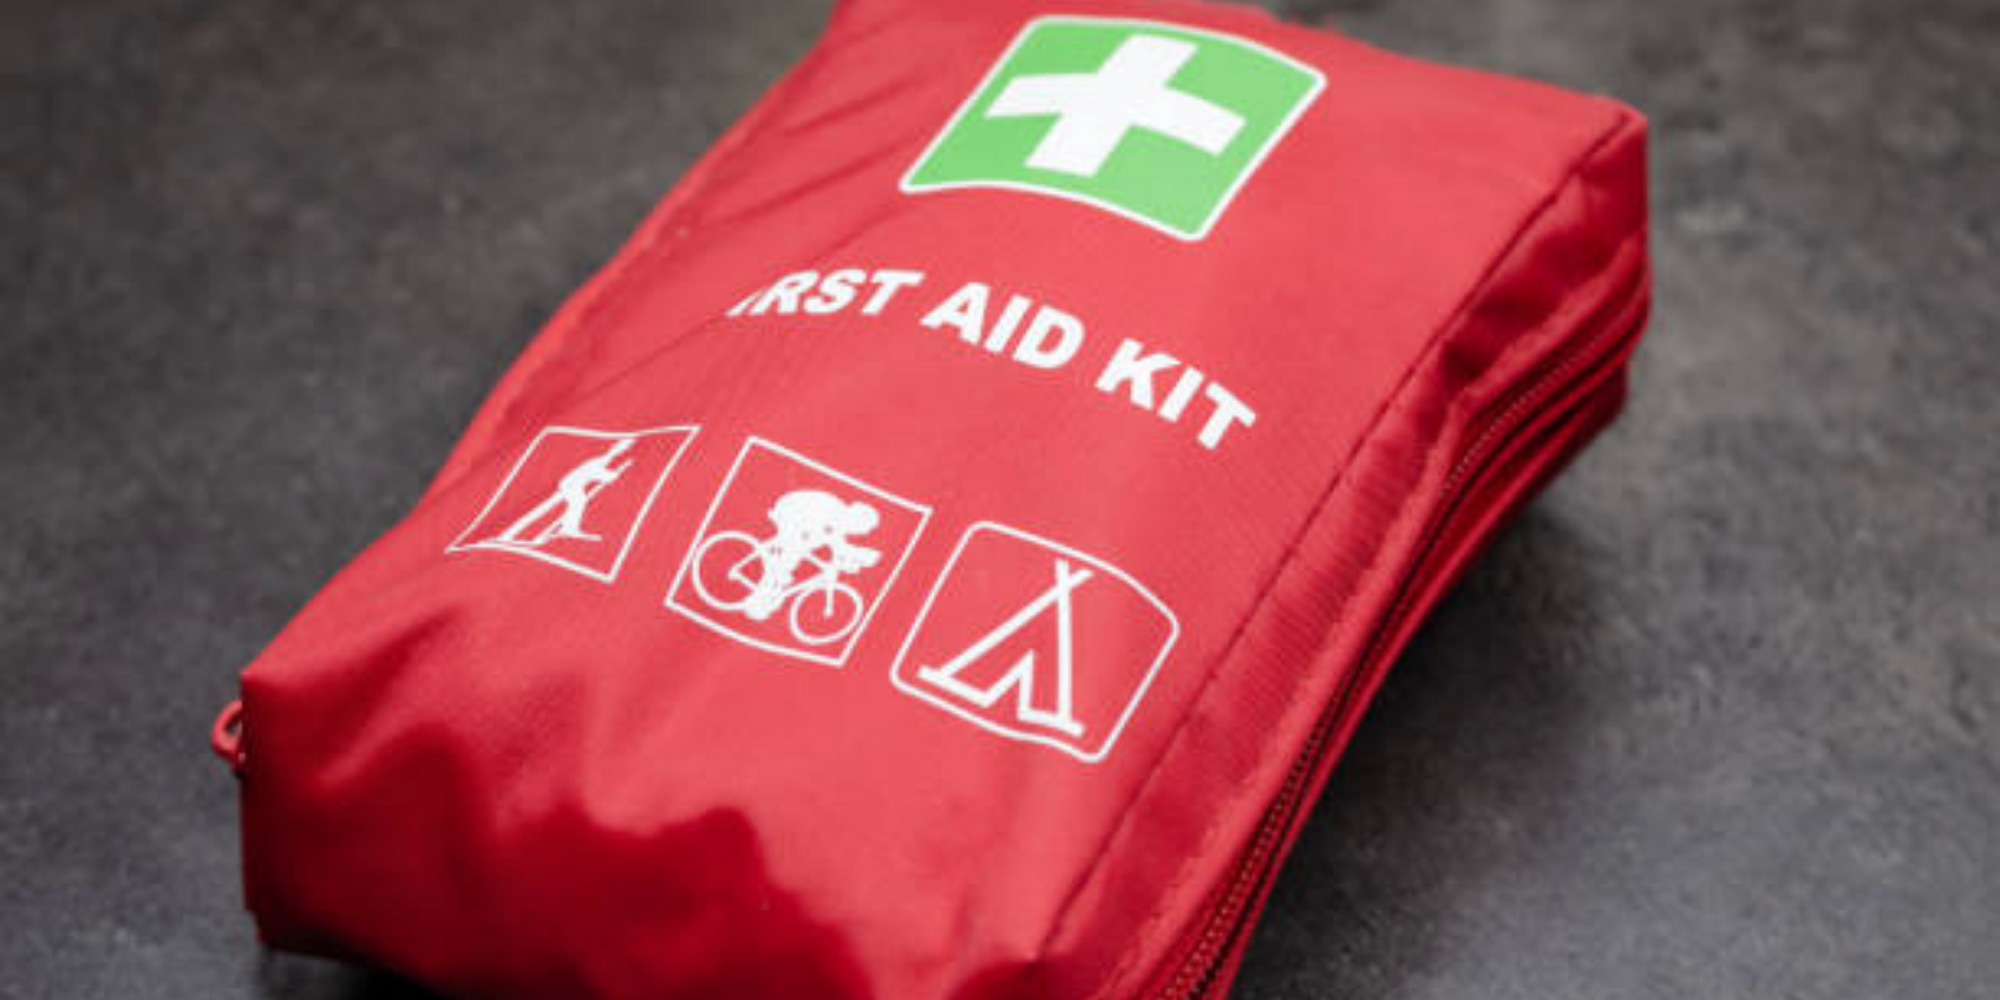 Emergency kit for vehicle, first aid kit for vehicle, vehicle first aid kit